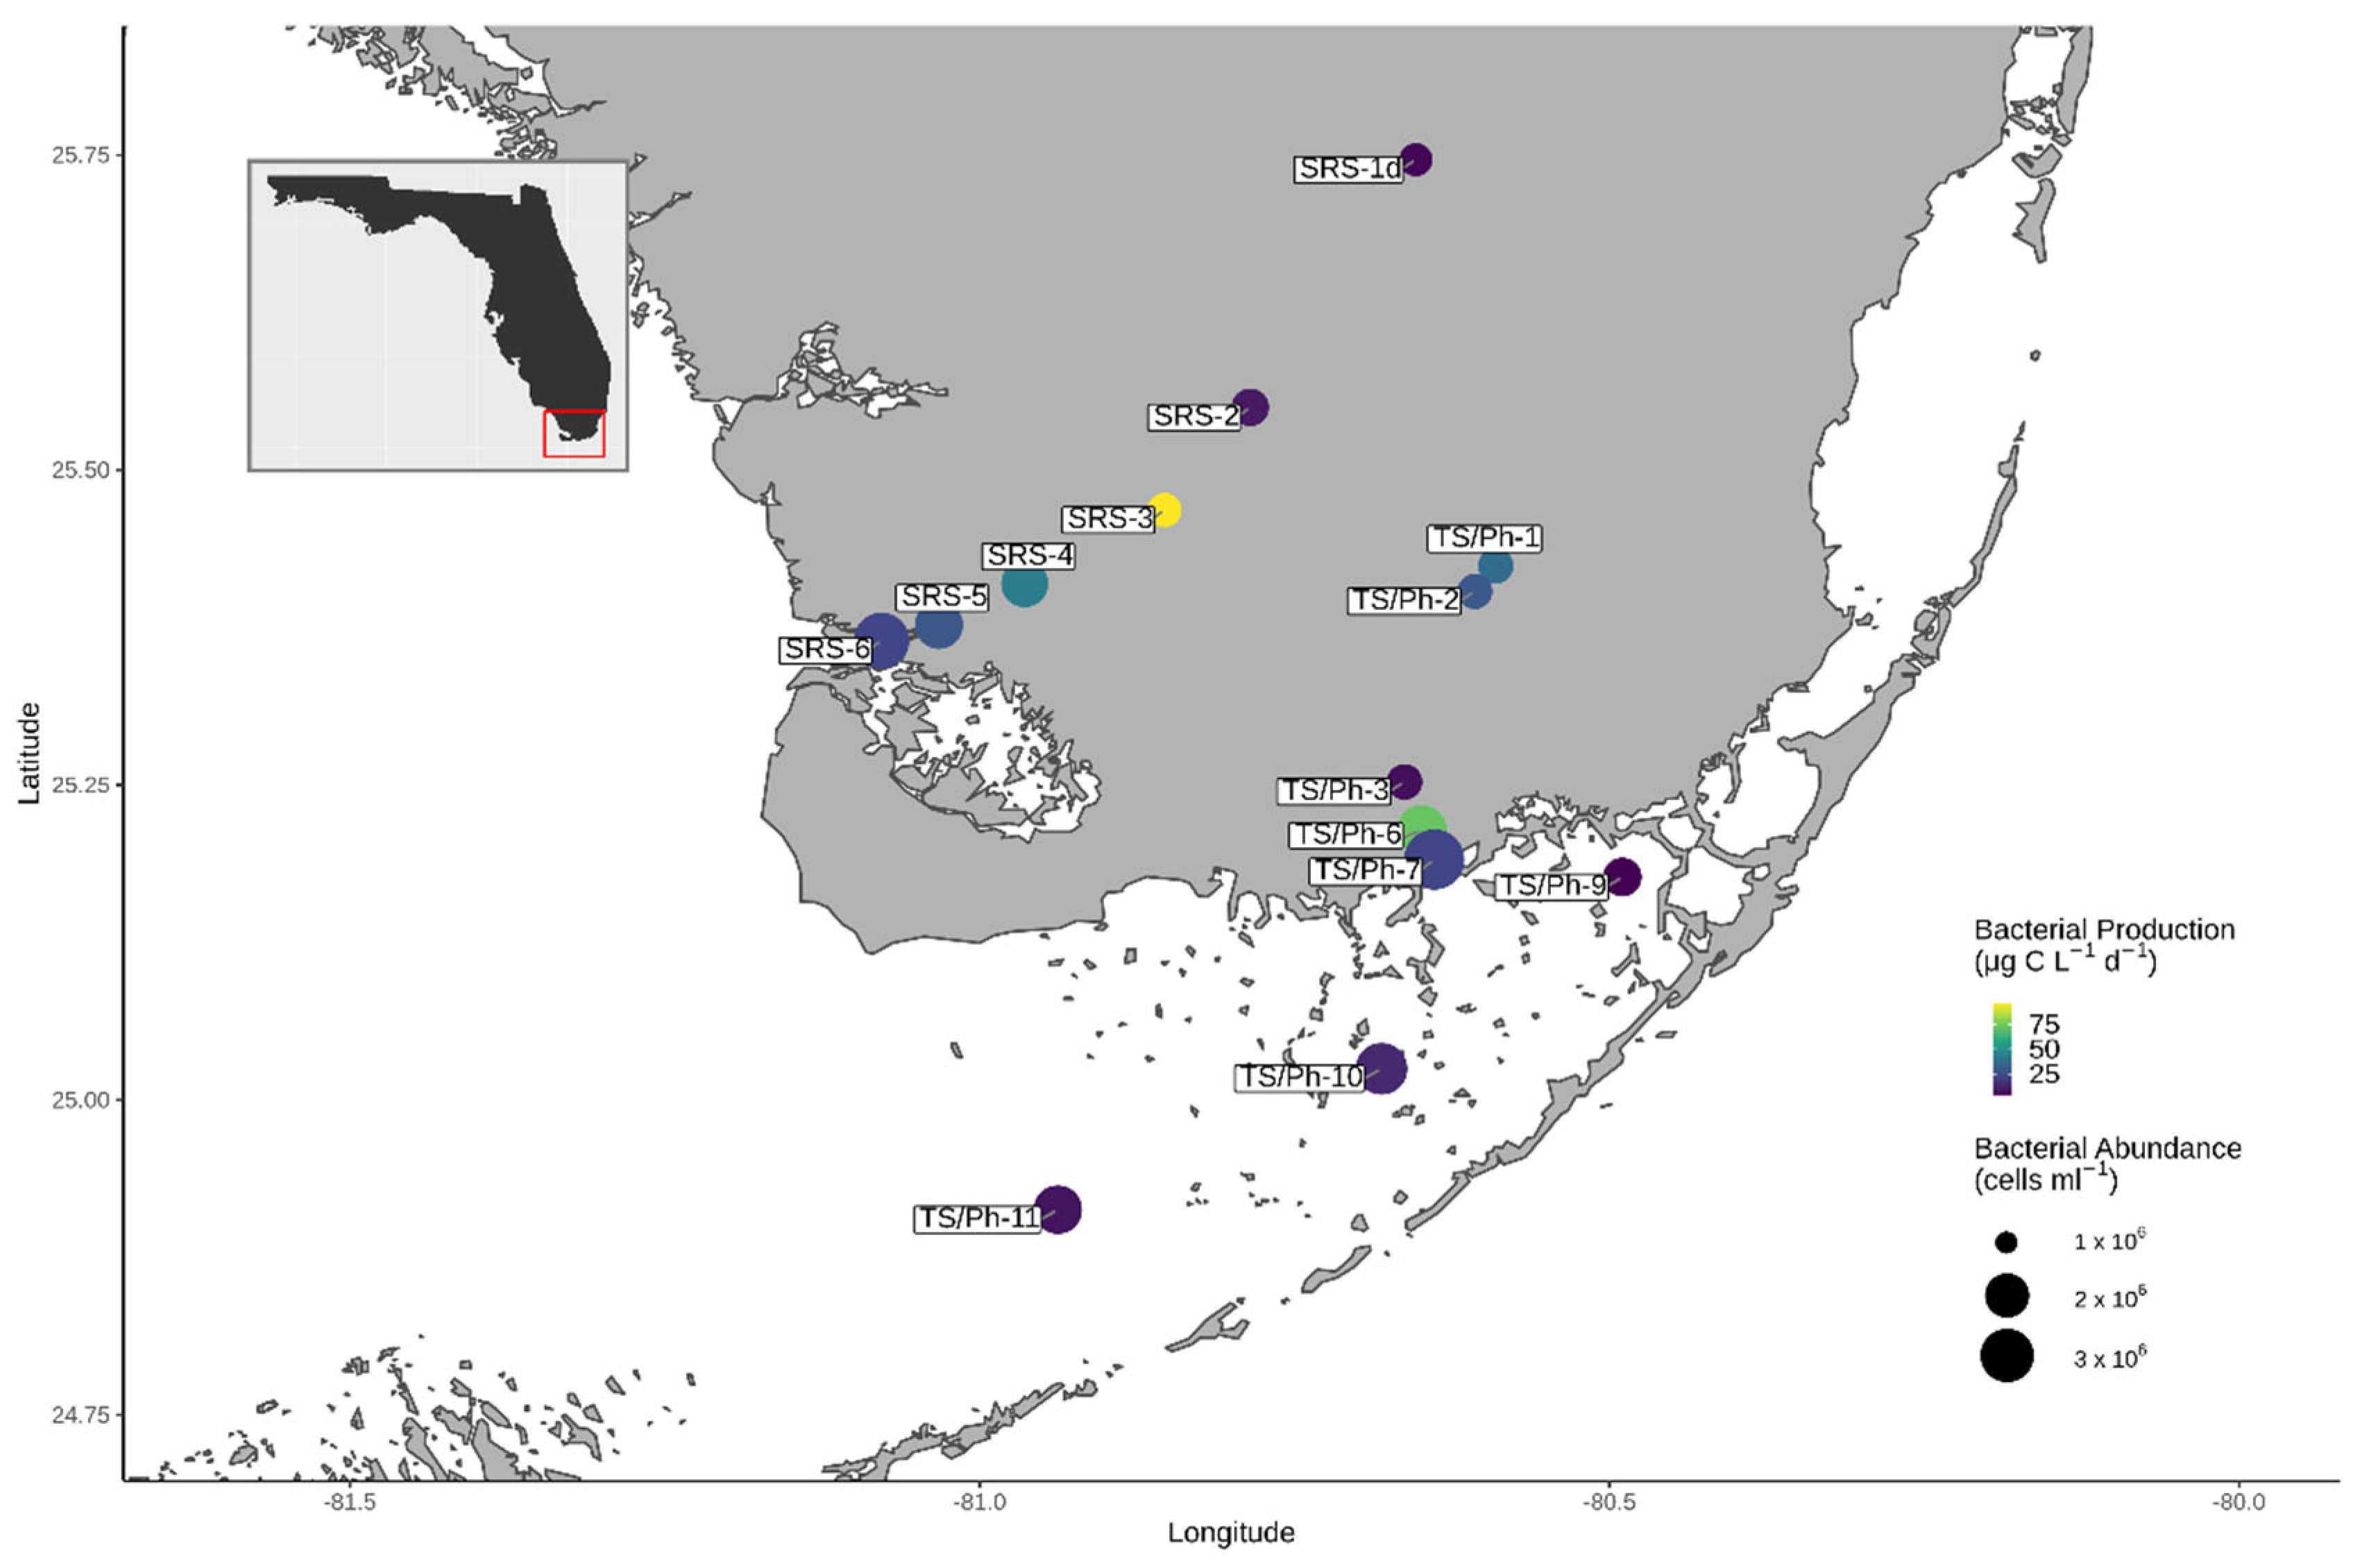 Microorganisms | Free Full-Text | Water Column Microbial Communities Vary  along Salinity Gradients in the Florida Coastal Everglades Wetlands | HTML